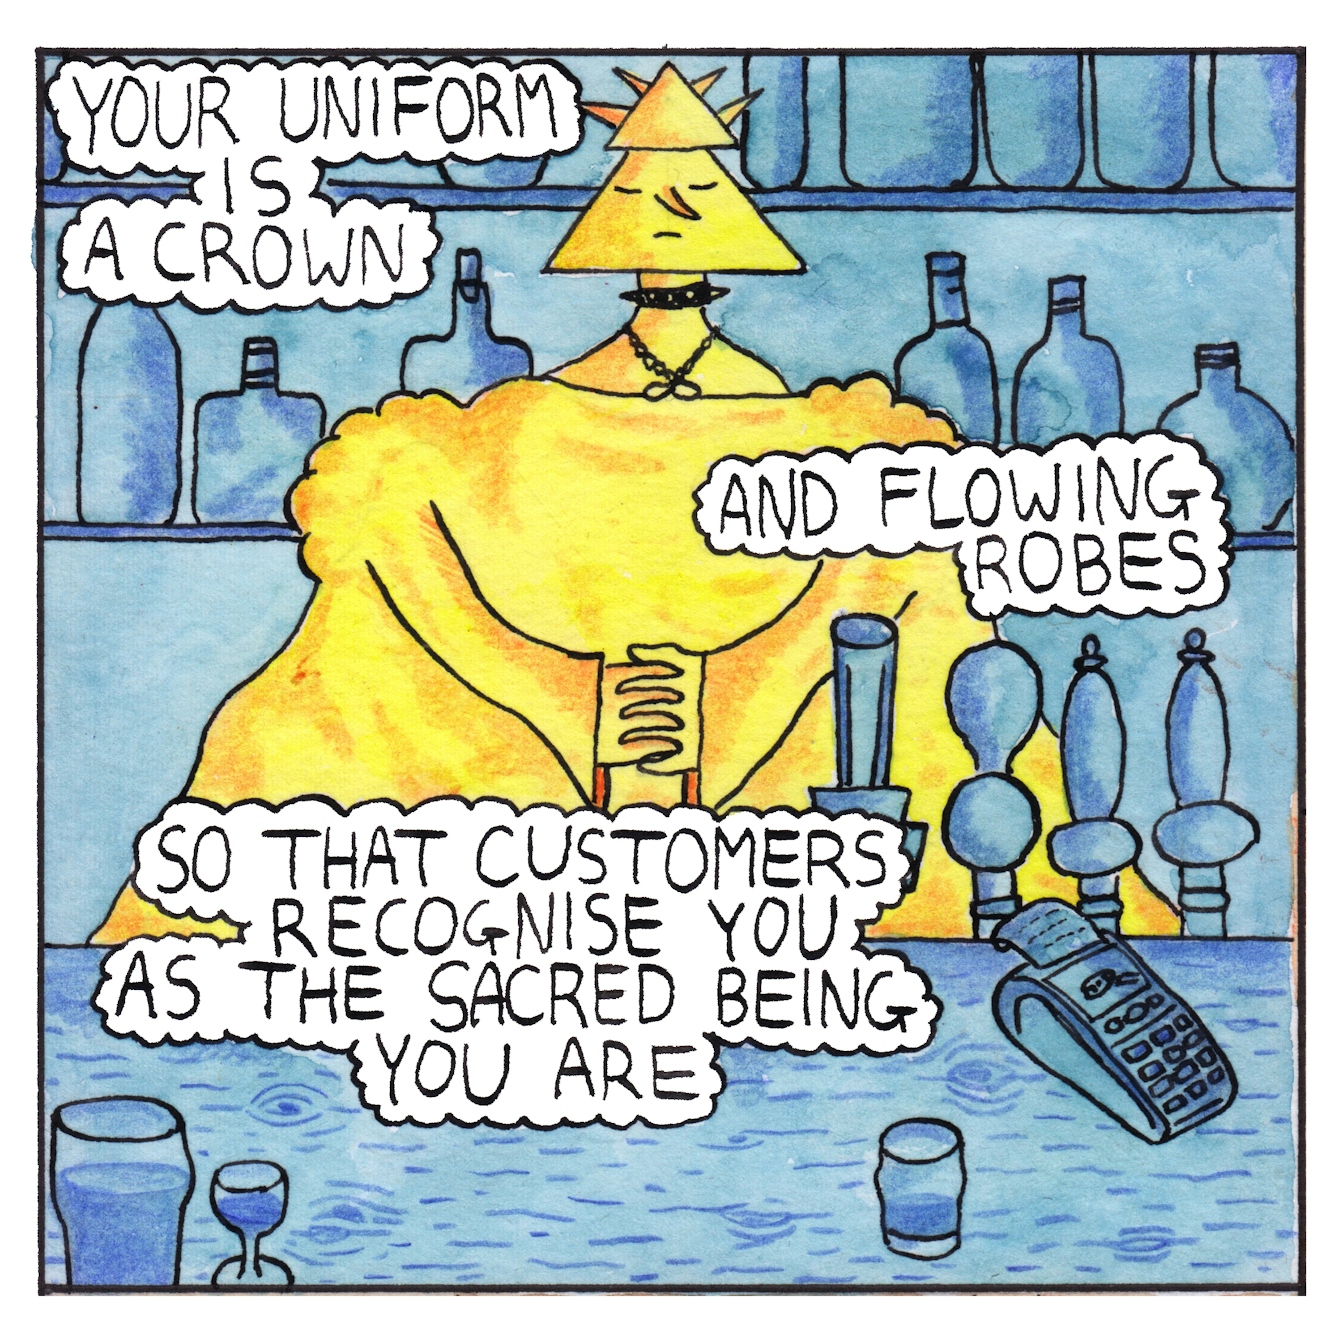 Panel 1 of a six-panel comic drawn with ink, watercolour and colour pencils: A yellow and orange figure working as a bartender stands behind a blue bar. They have a triangular head and a triangular hat with spikes. They wear a spiked dog collar and a necklace. Their eyes are closed; they are regal and serene with hands clasped together. Three bubbles of text describe what the bartender is wearing: "Your uniform is a crown, and flowing robes, so that customers recognise you as the sacred being you are"